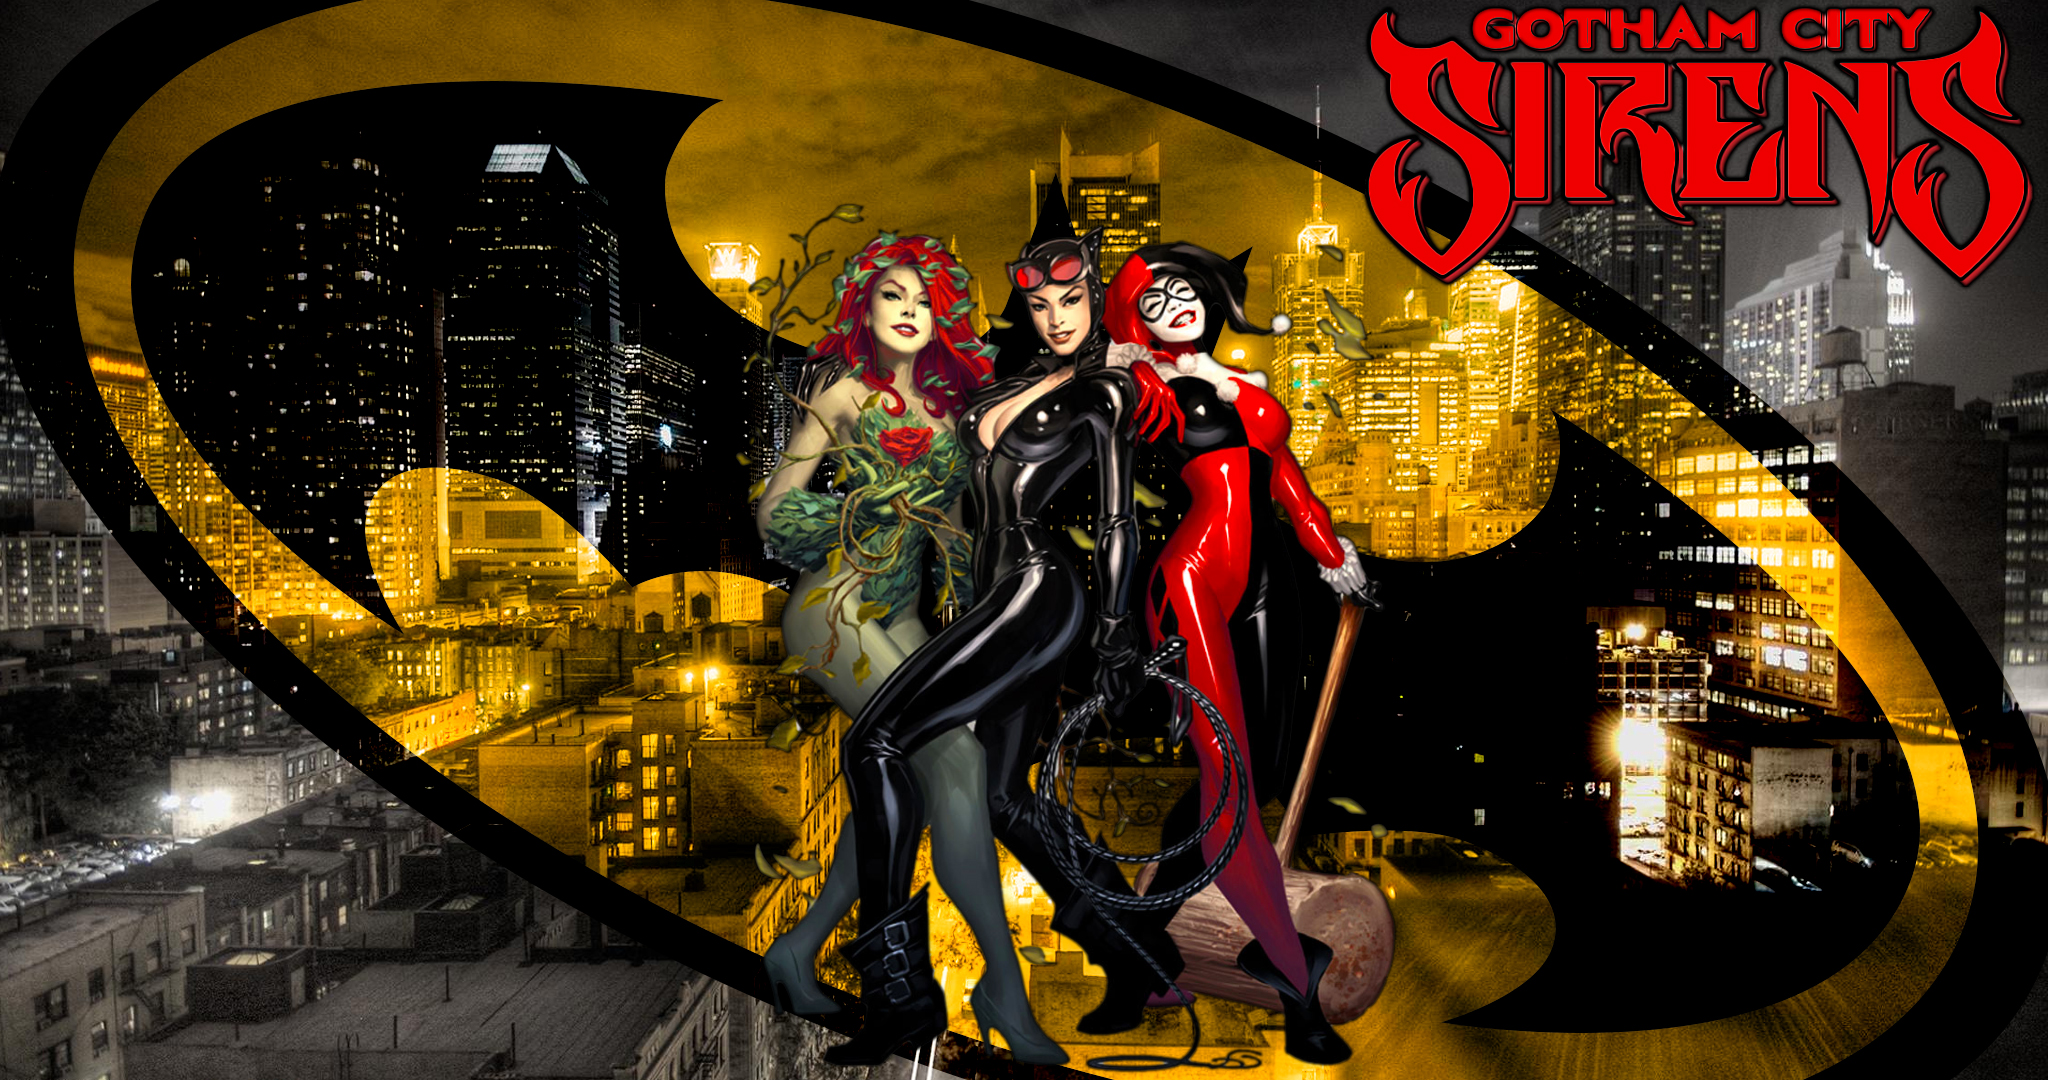 Gotham City Sirens HD Wallpapers and Backgrounds. 